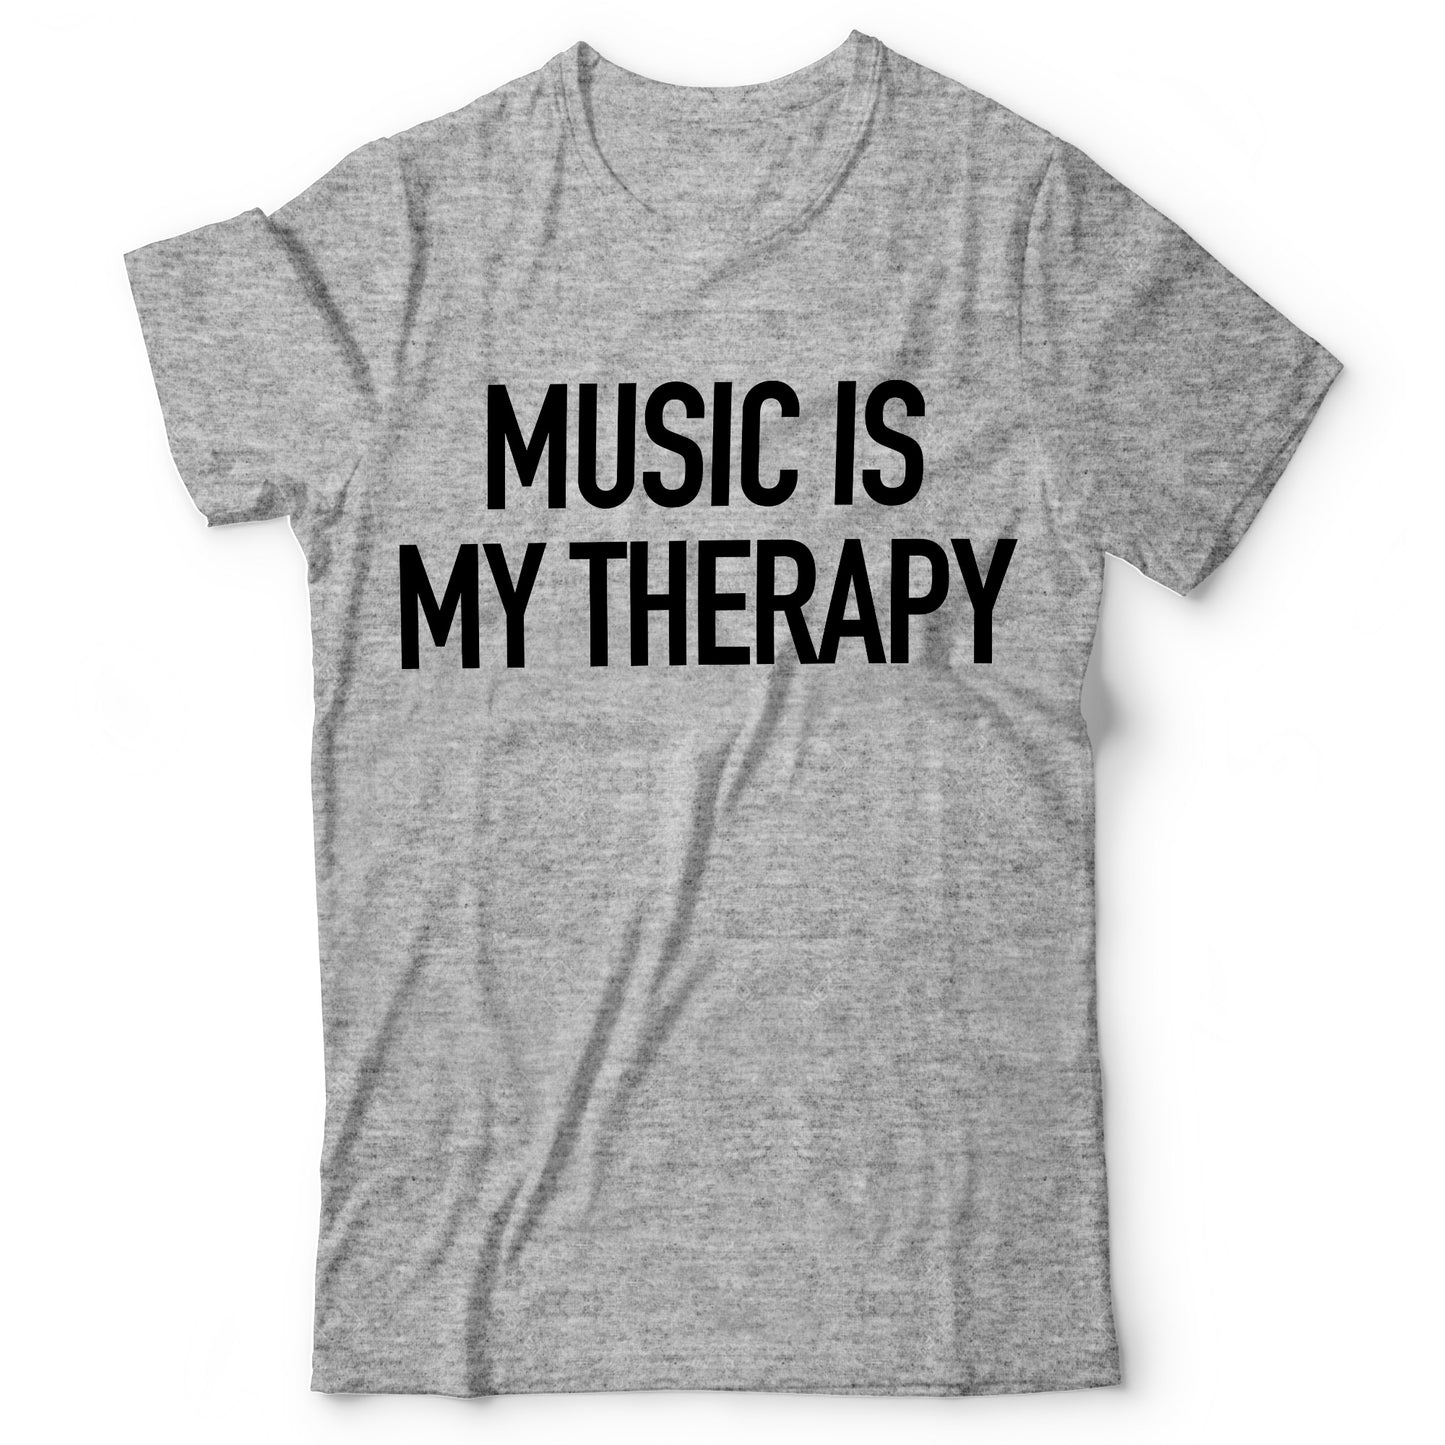 Music is My Therapy - T-shirt